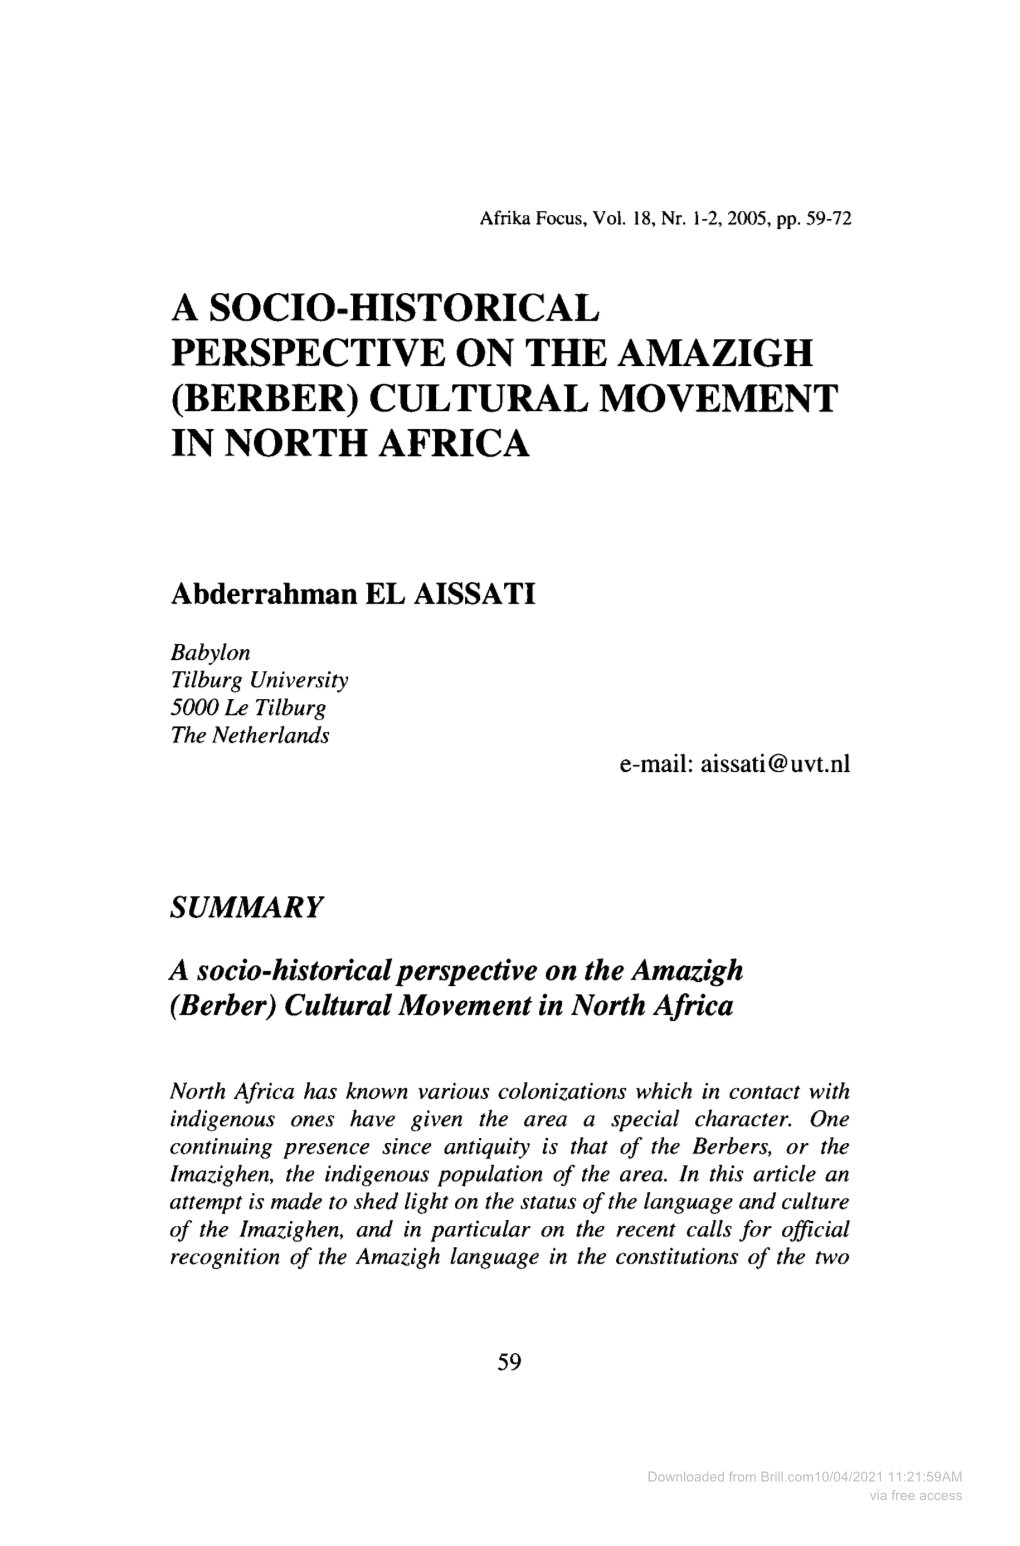 A Socio-Historical Perspective on the Amazigh (Berber) Cultural Movement in North Africa